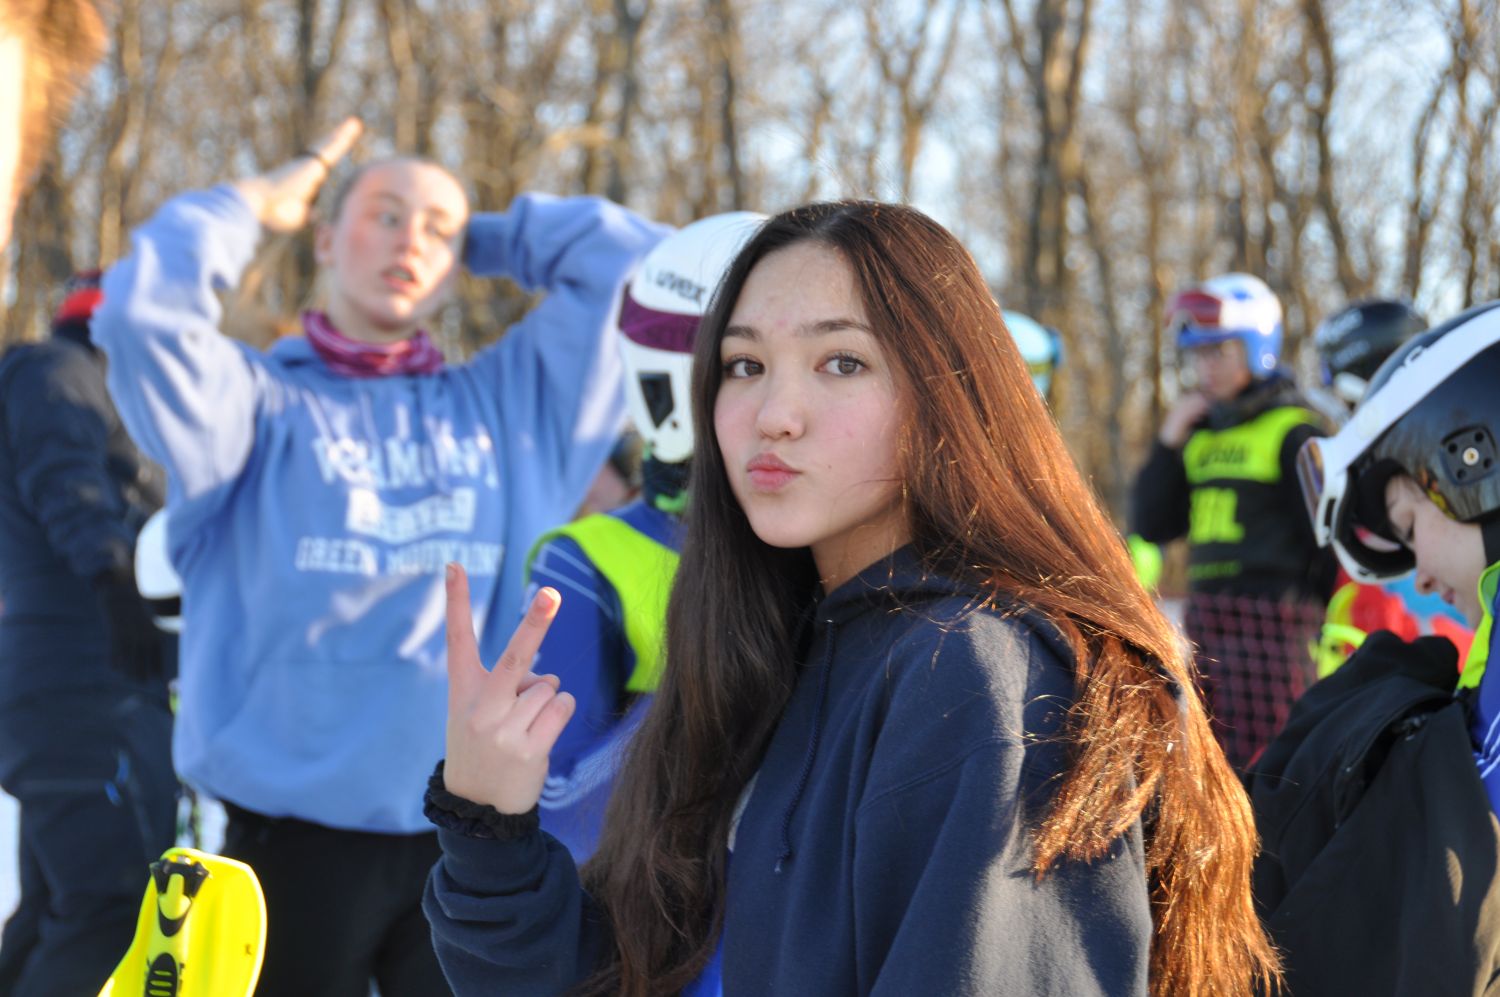  Rachel with the infamous hand gesture| JV Championships